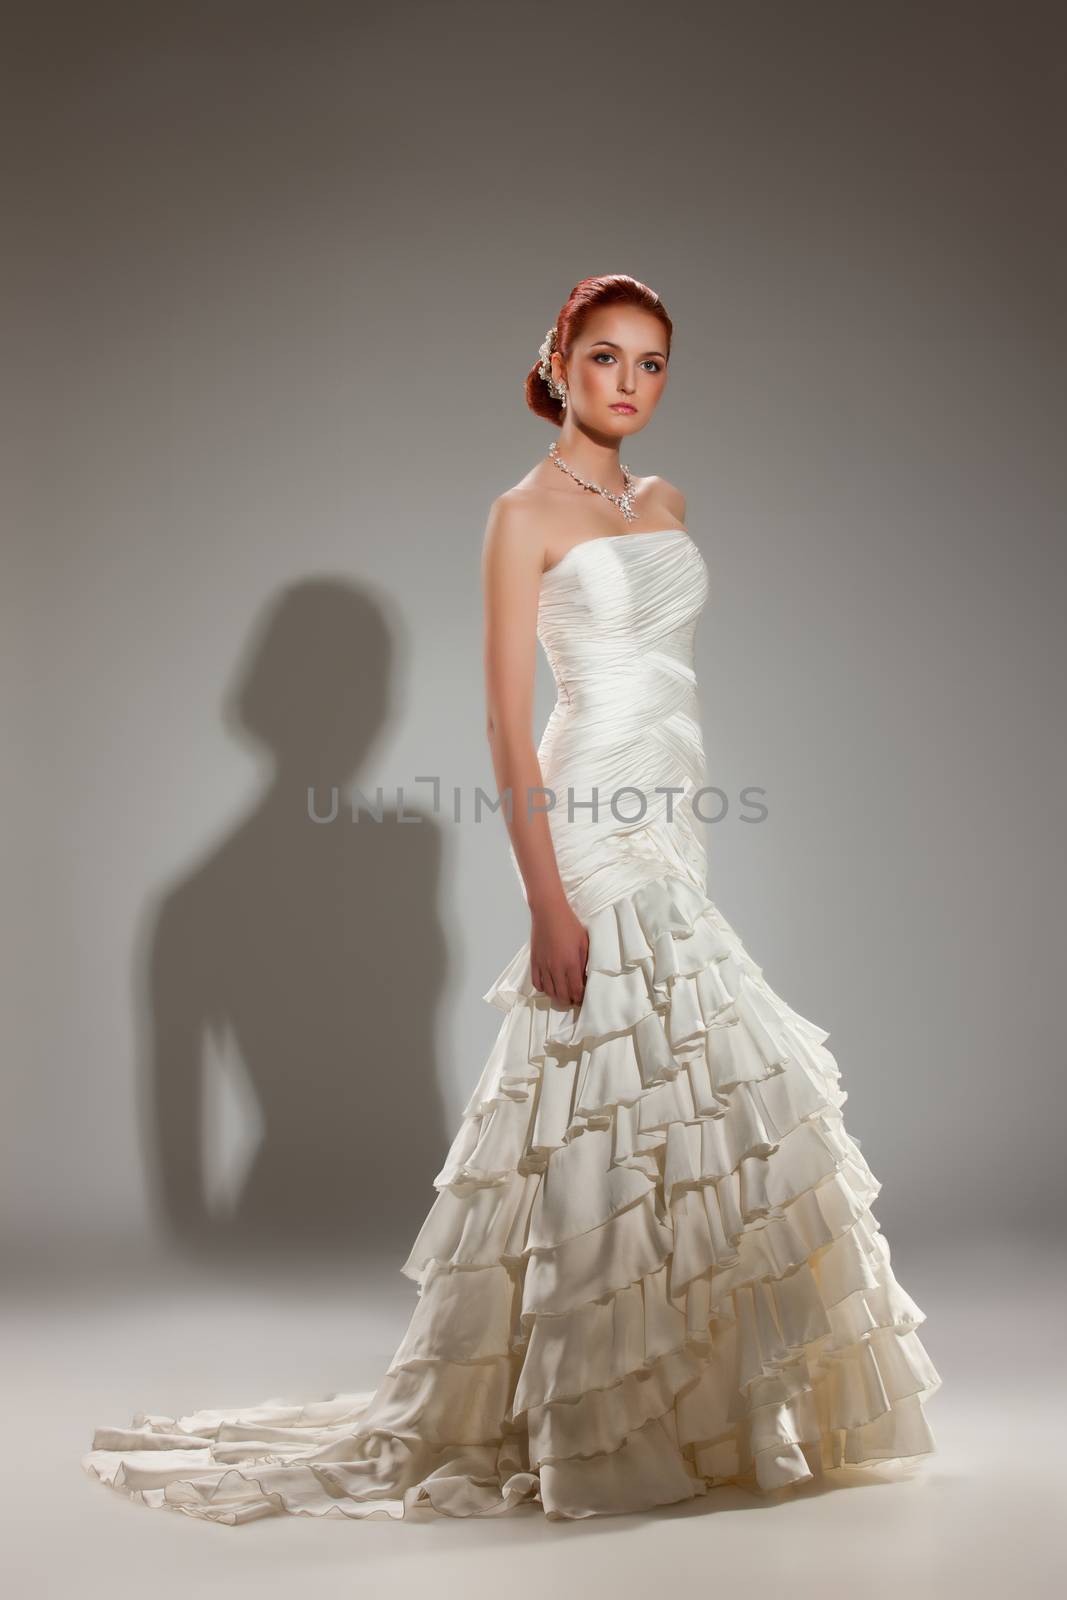 Young woman in a weddng dress on a studio background